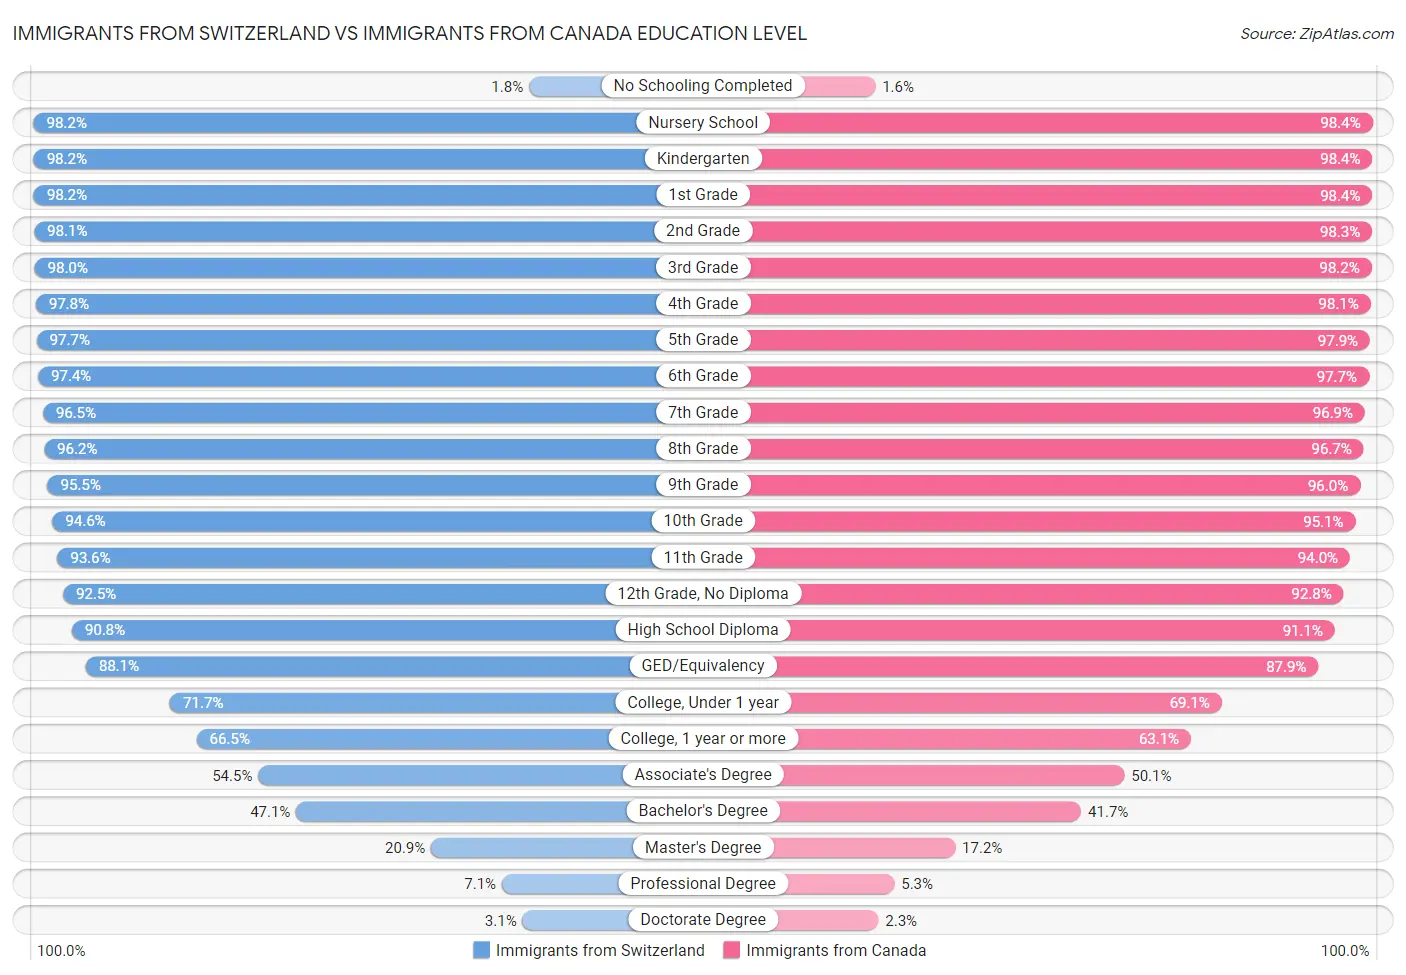 Immigrants from Switzerland vs Immigrants from Canada Education Level